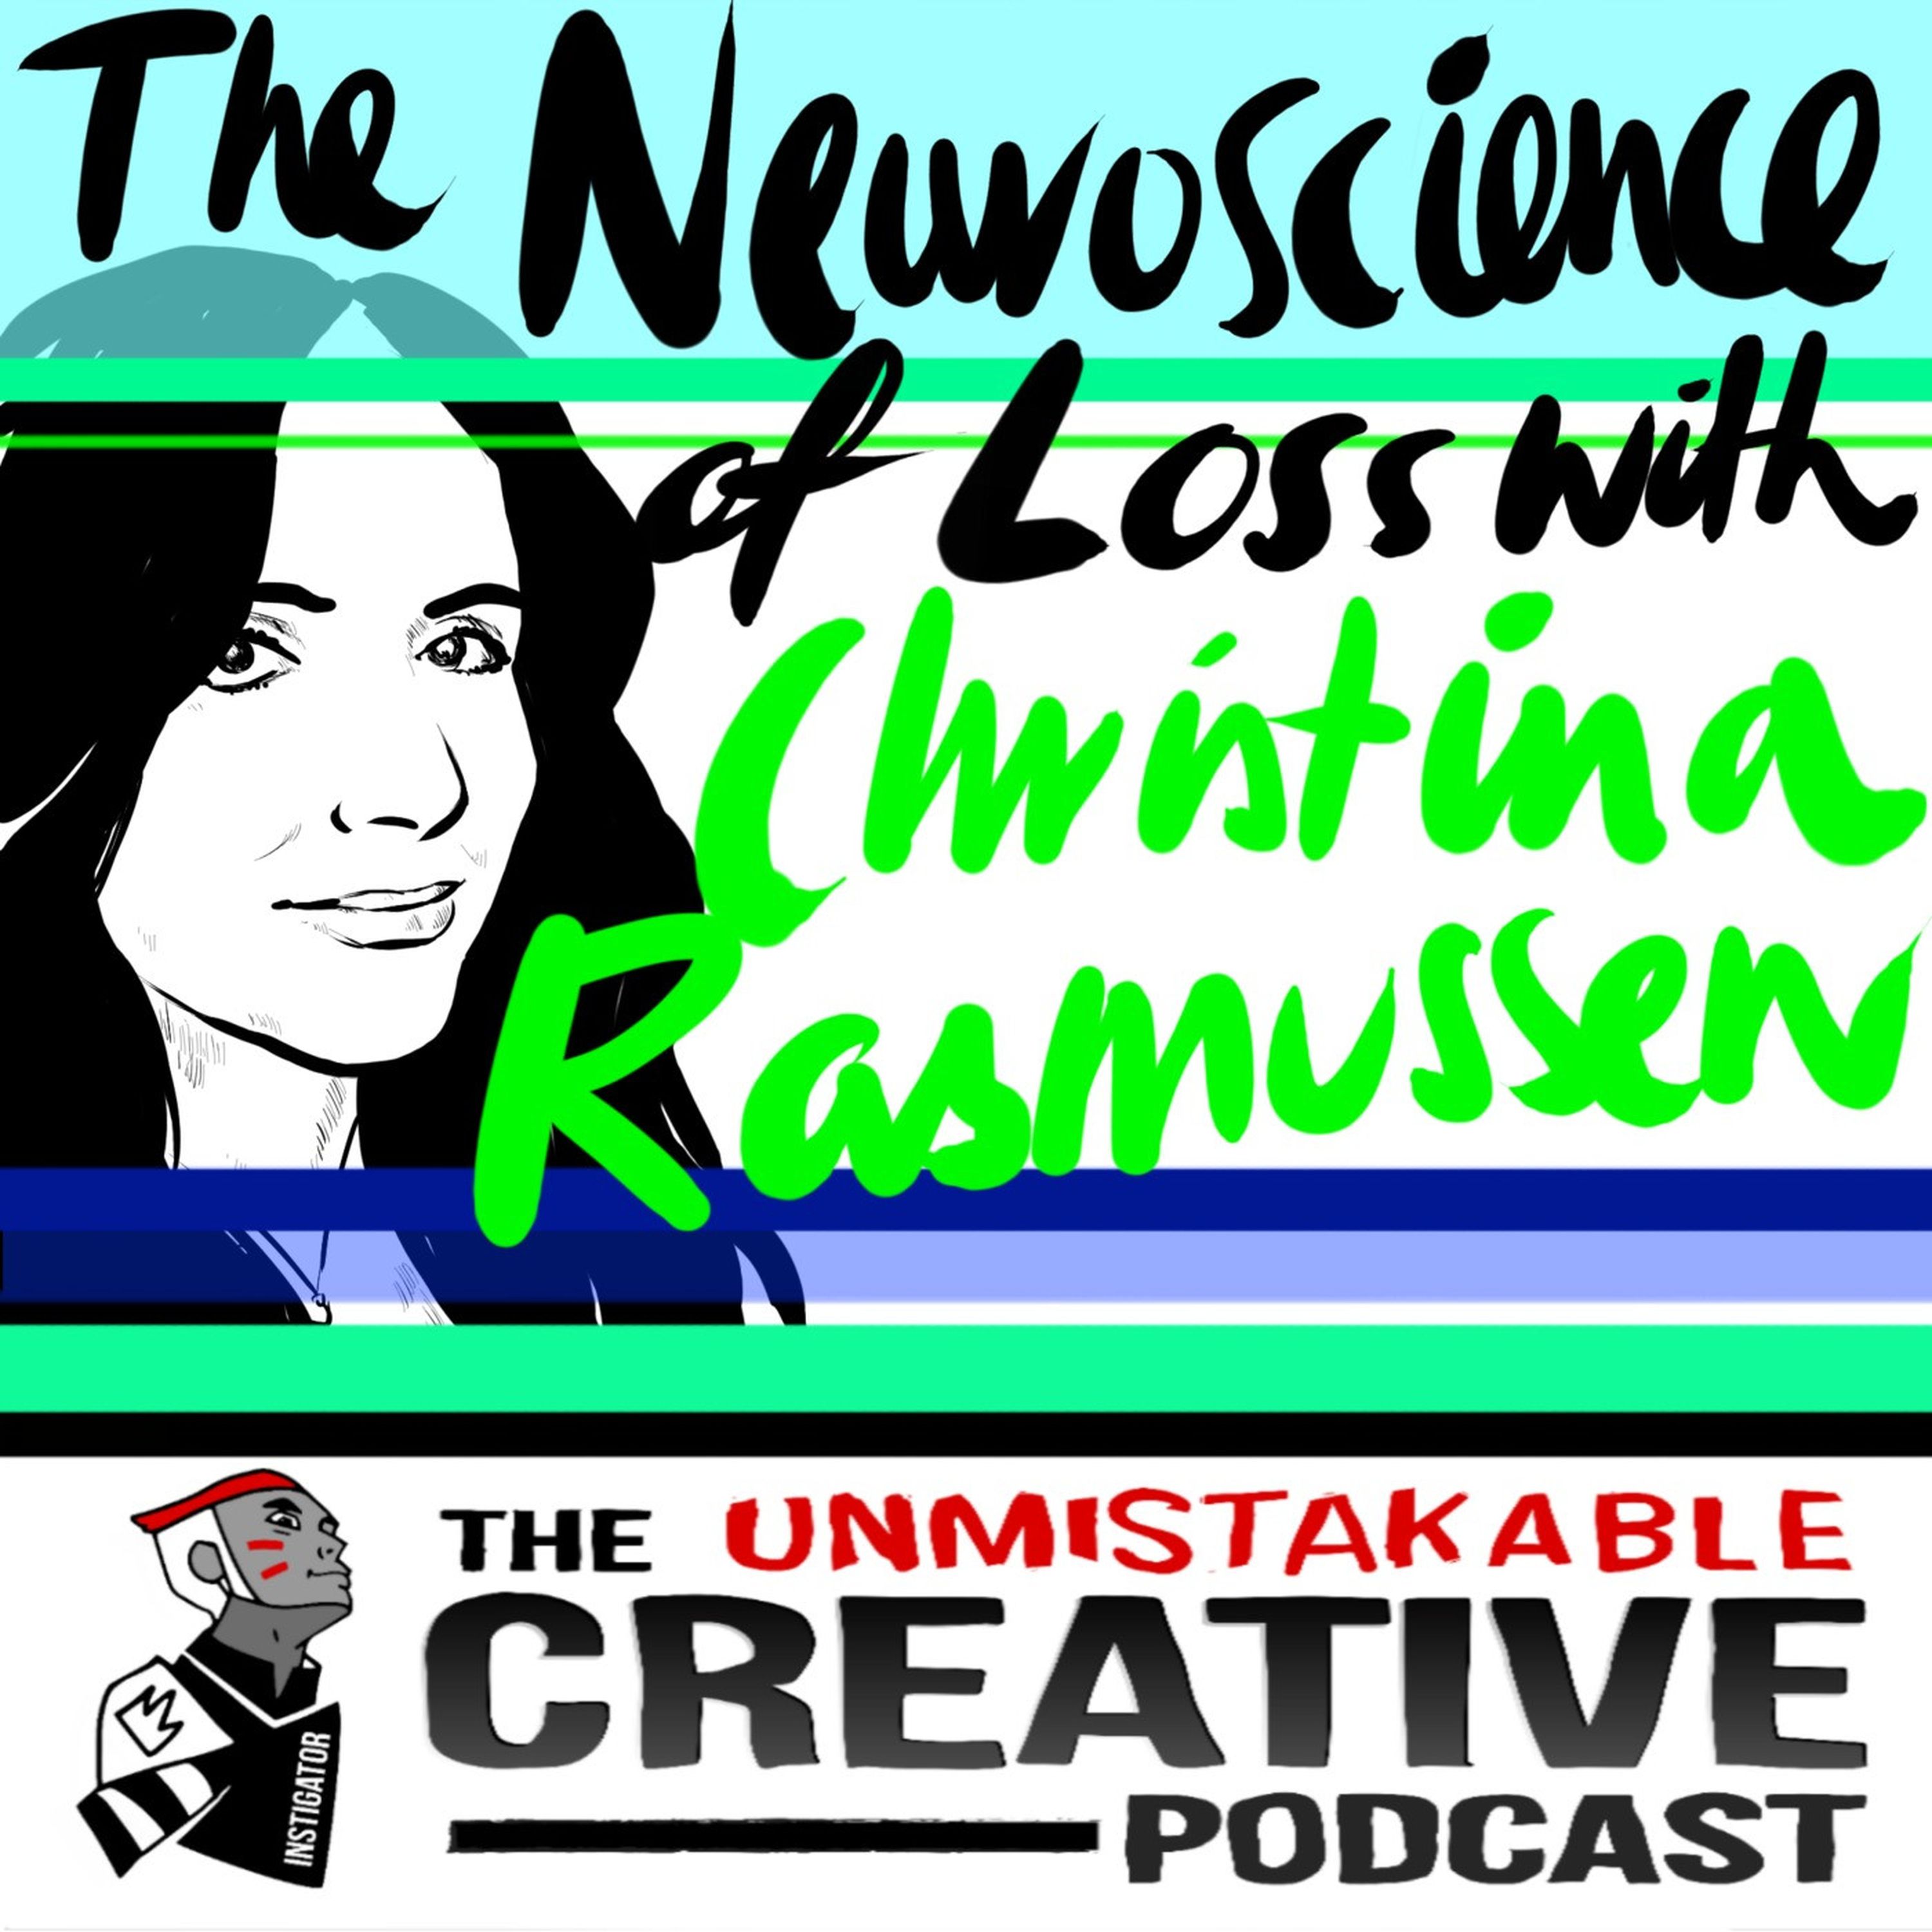 The Neuroscience of Loss with Christina Rasmussen Image